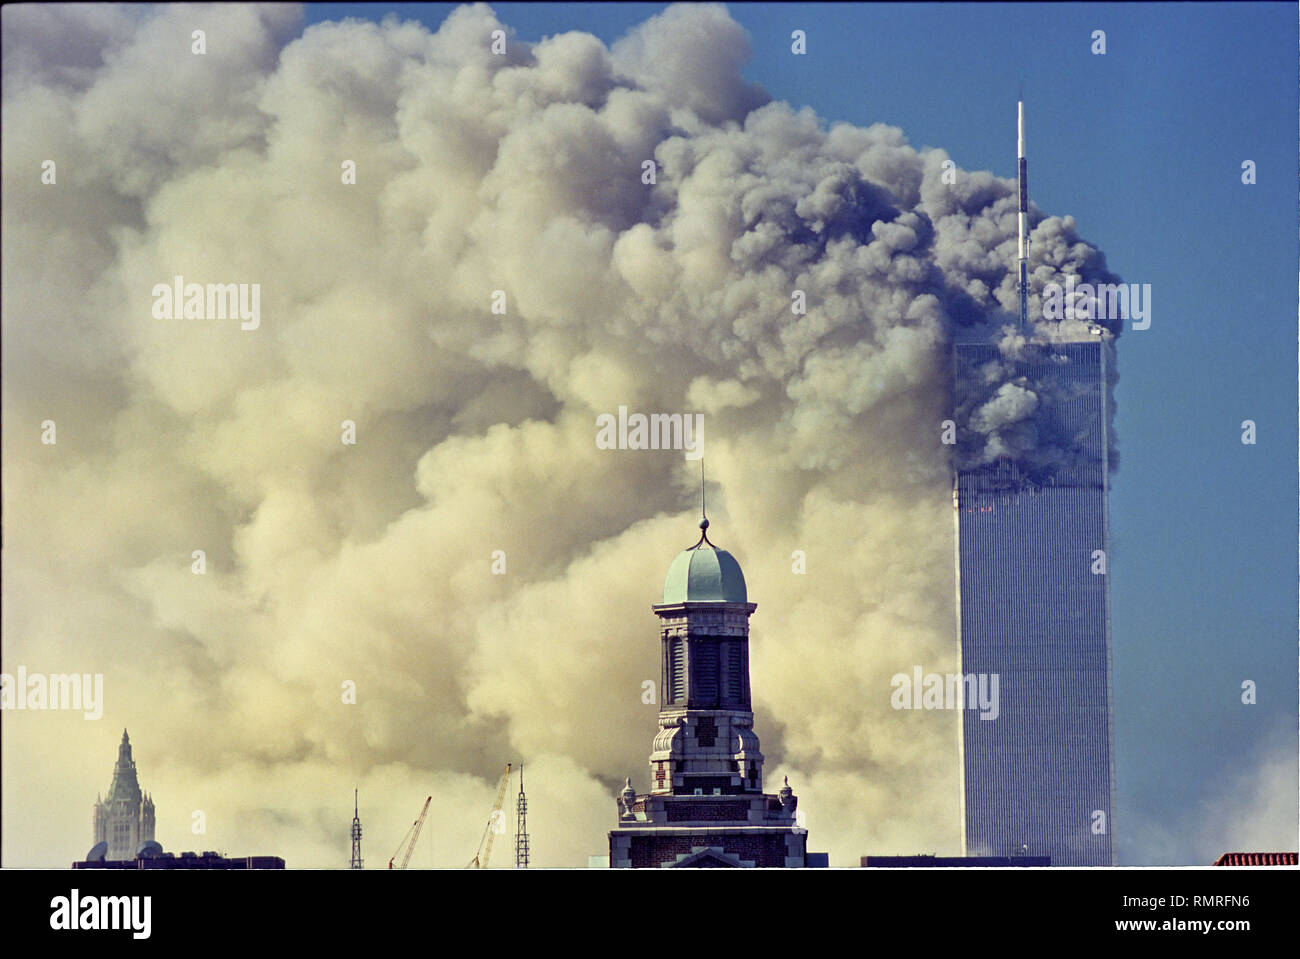 World Trade Center Attack photos taken from 14 street on a rooftop as the towers burn and one is falling. Stock Photo